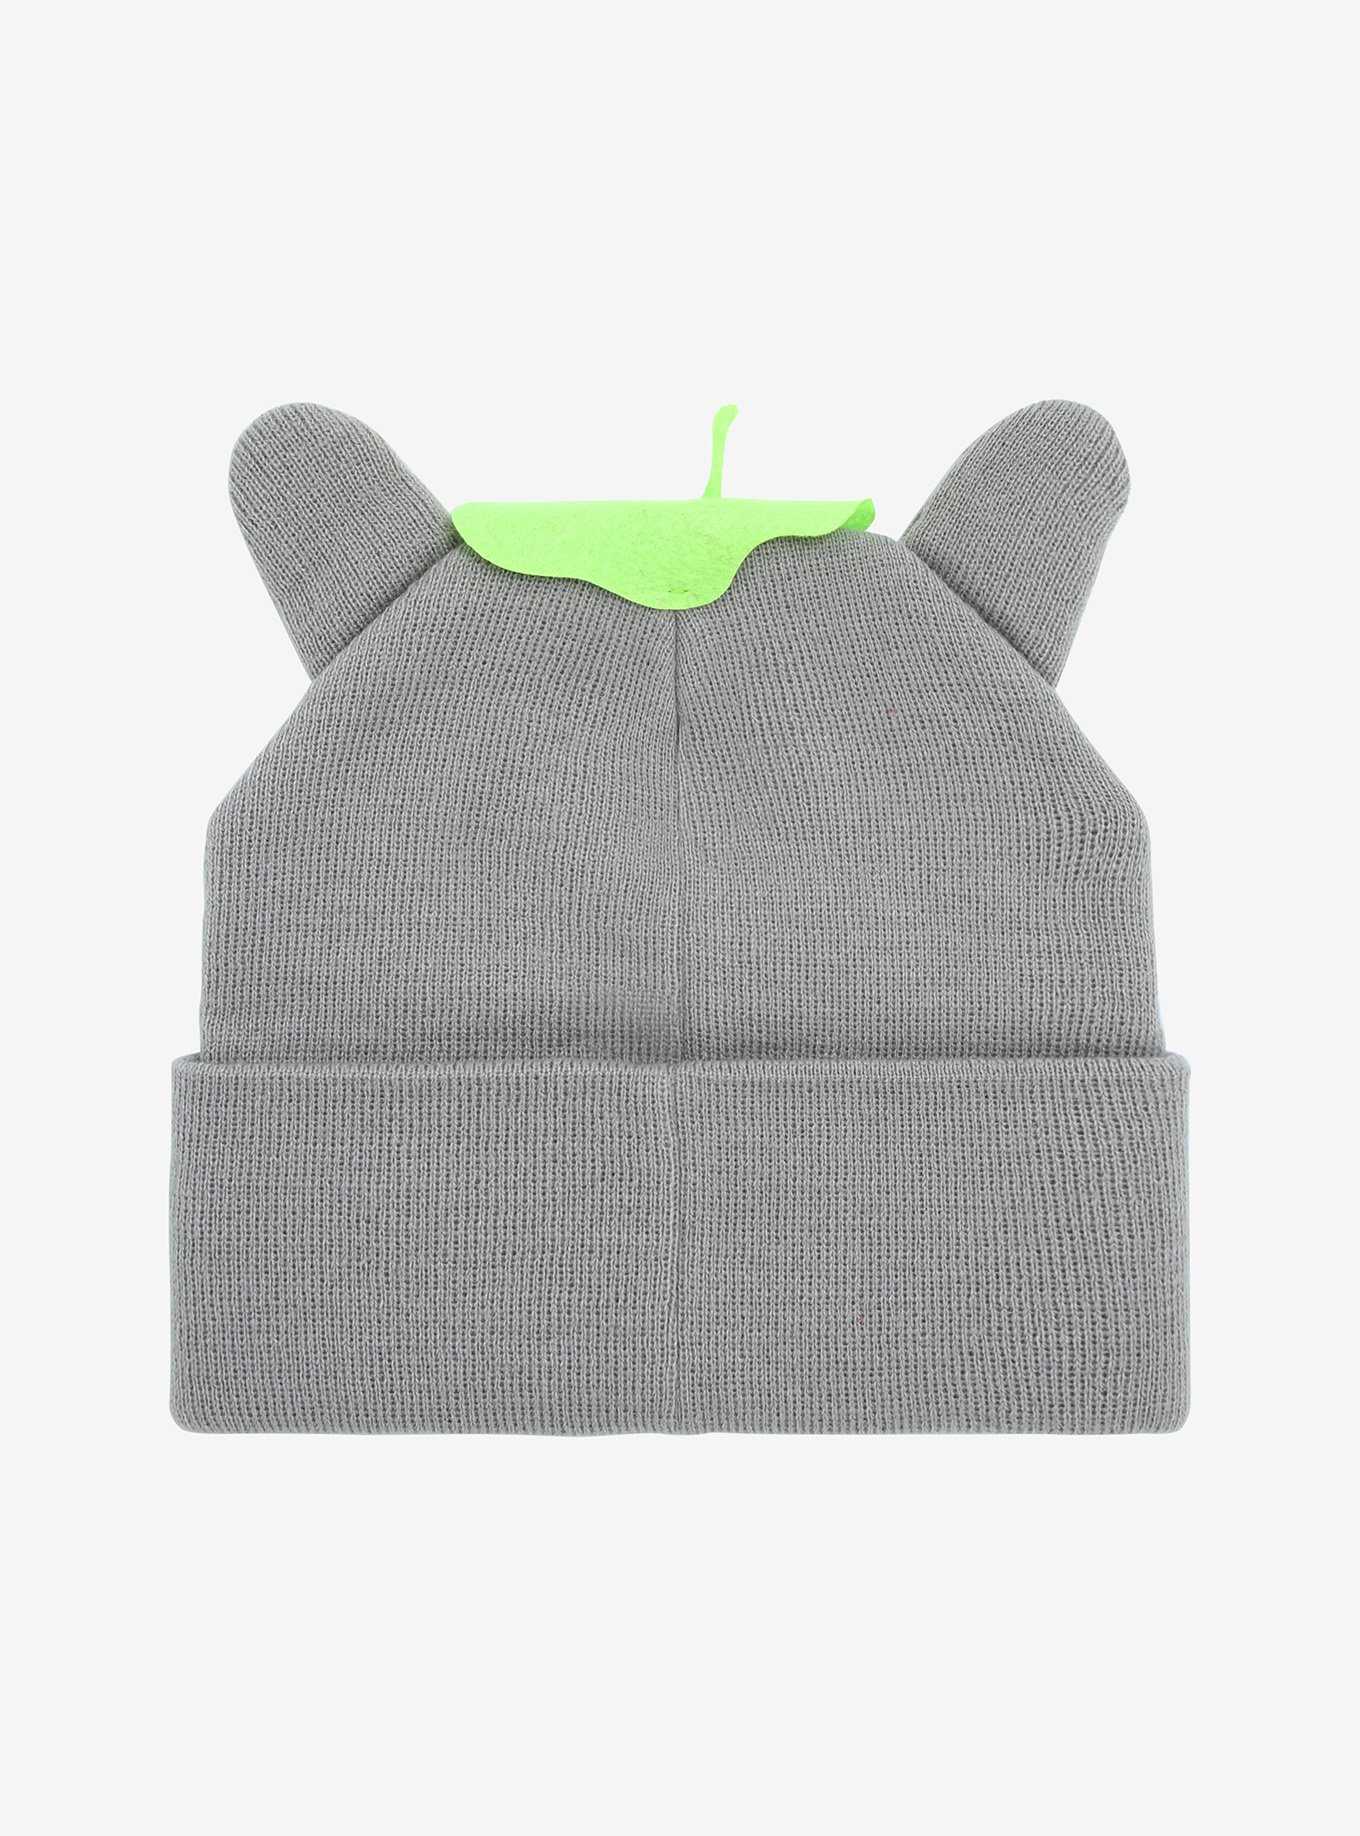 BoxLunch Beanies Trendy | Beanies: Slouchy, & Cool Pop Culture